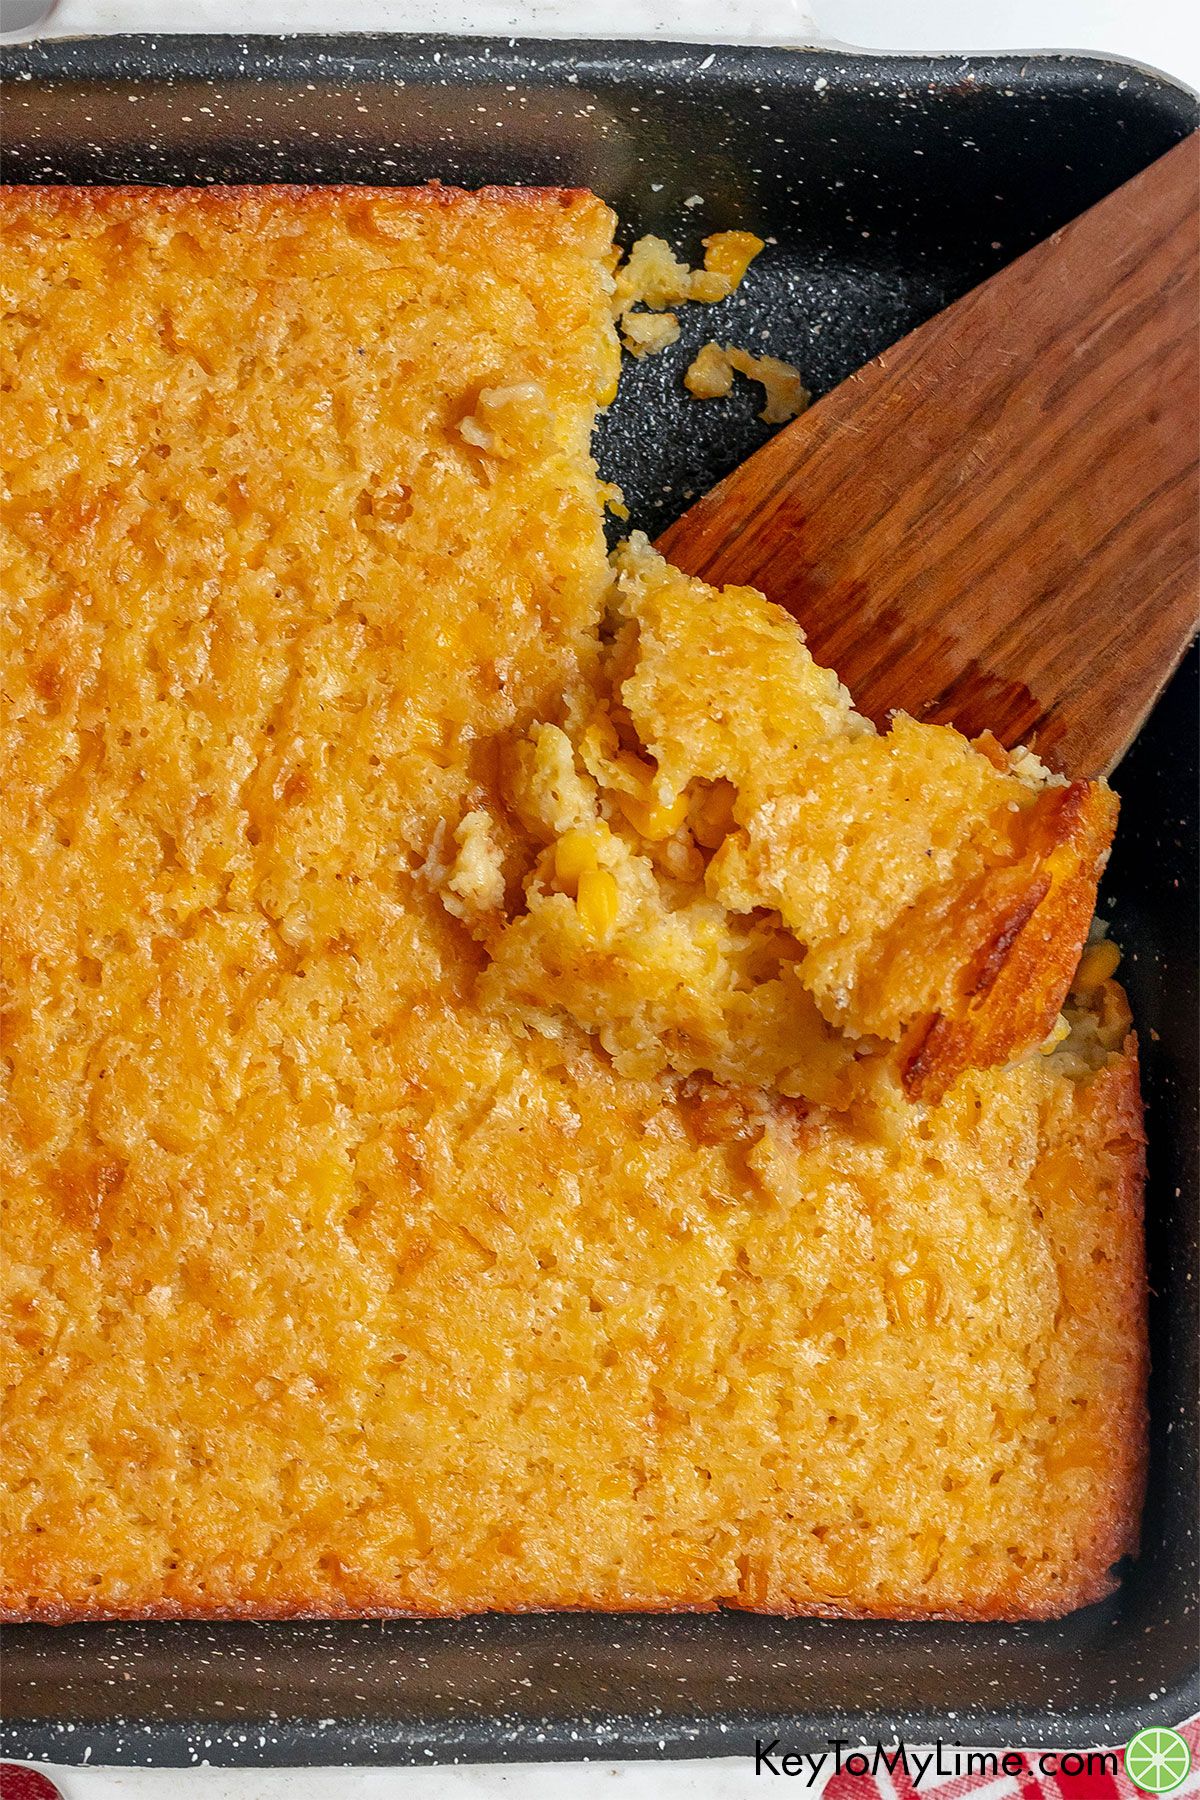 An overhead image of corn casserole dish scooping out a serving with a wooden spatula.